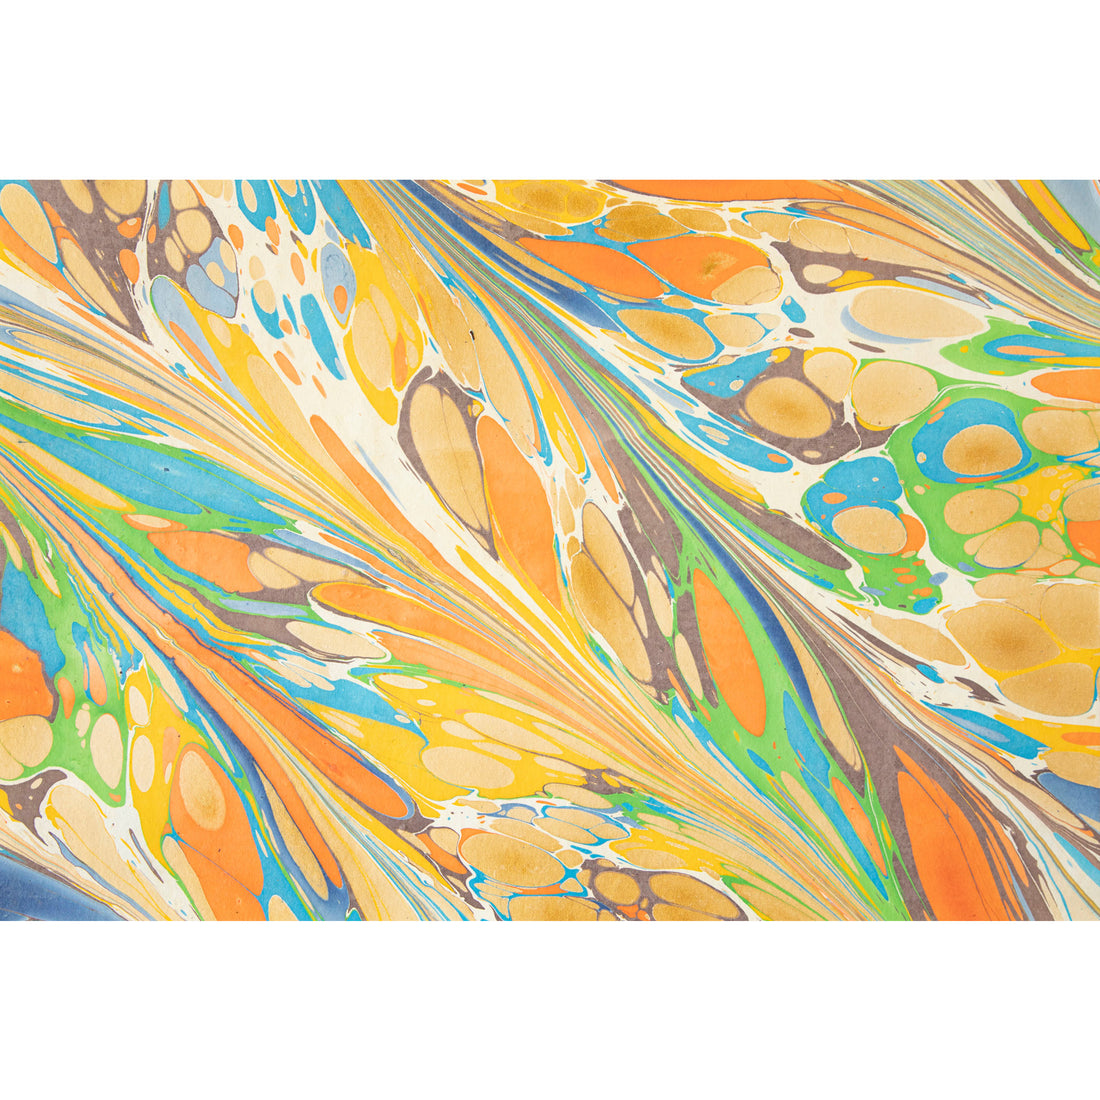 An abstract, marbled pattern featuring spots of orange, blue, green, marigold, cream and brown on white, swiped together in alternating diagonal strokes.